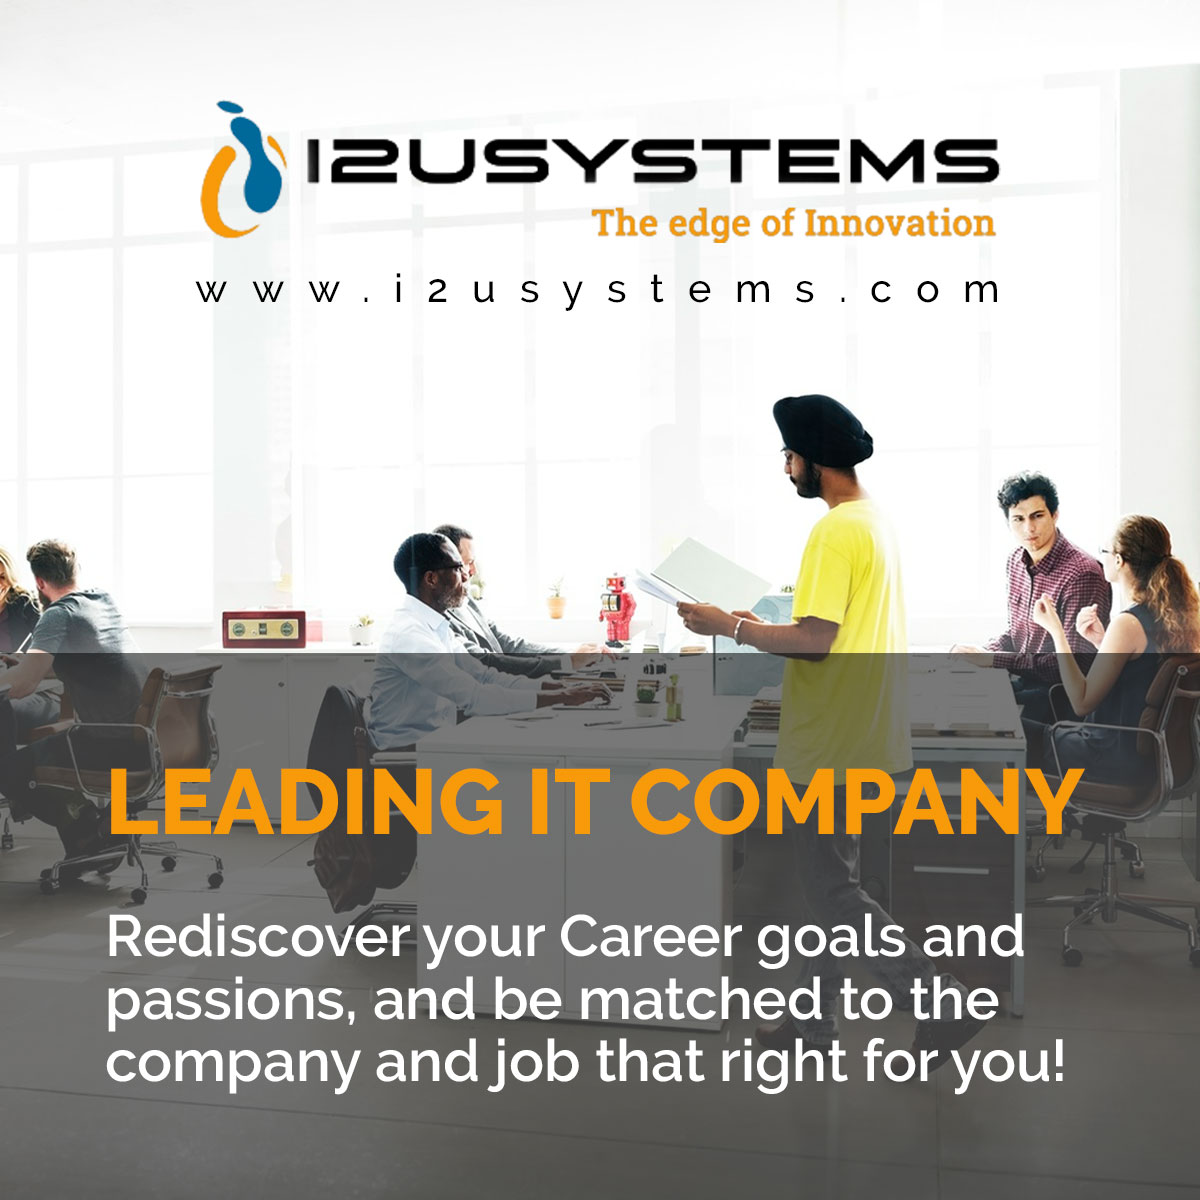 SOFTWARE AND IT STAFFING
Delivering Impactful IT Staffing and Software Development Solutions.

#i2usystems #c2crequirements #directclient  #network #jobopportunity #webdevelopment #focus #webdesign #overlap #development #software #itstaffing #developement #staffing #solutions